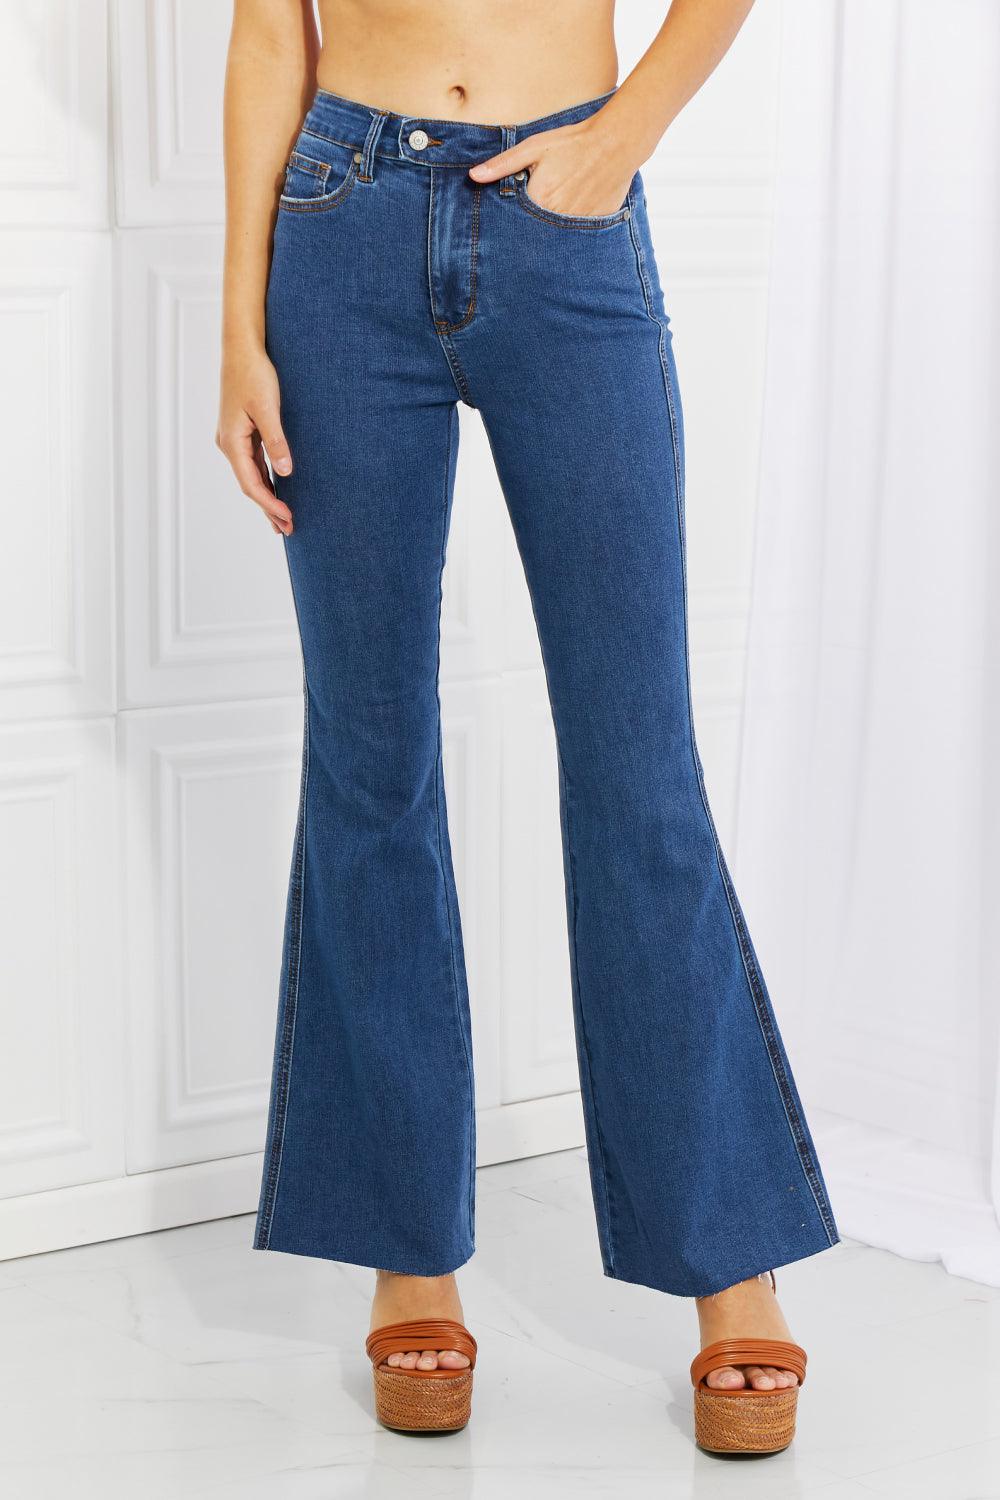 Blakeley (Judy Blue) Flared Tummy Control Jeans